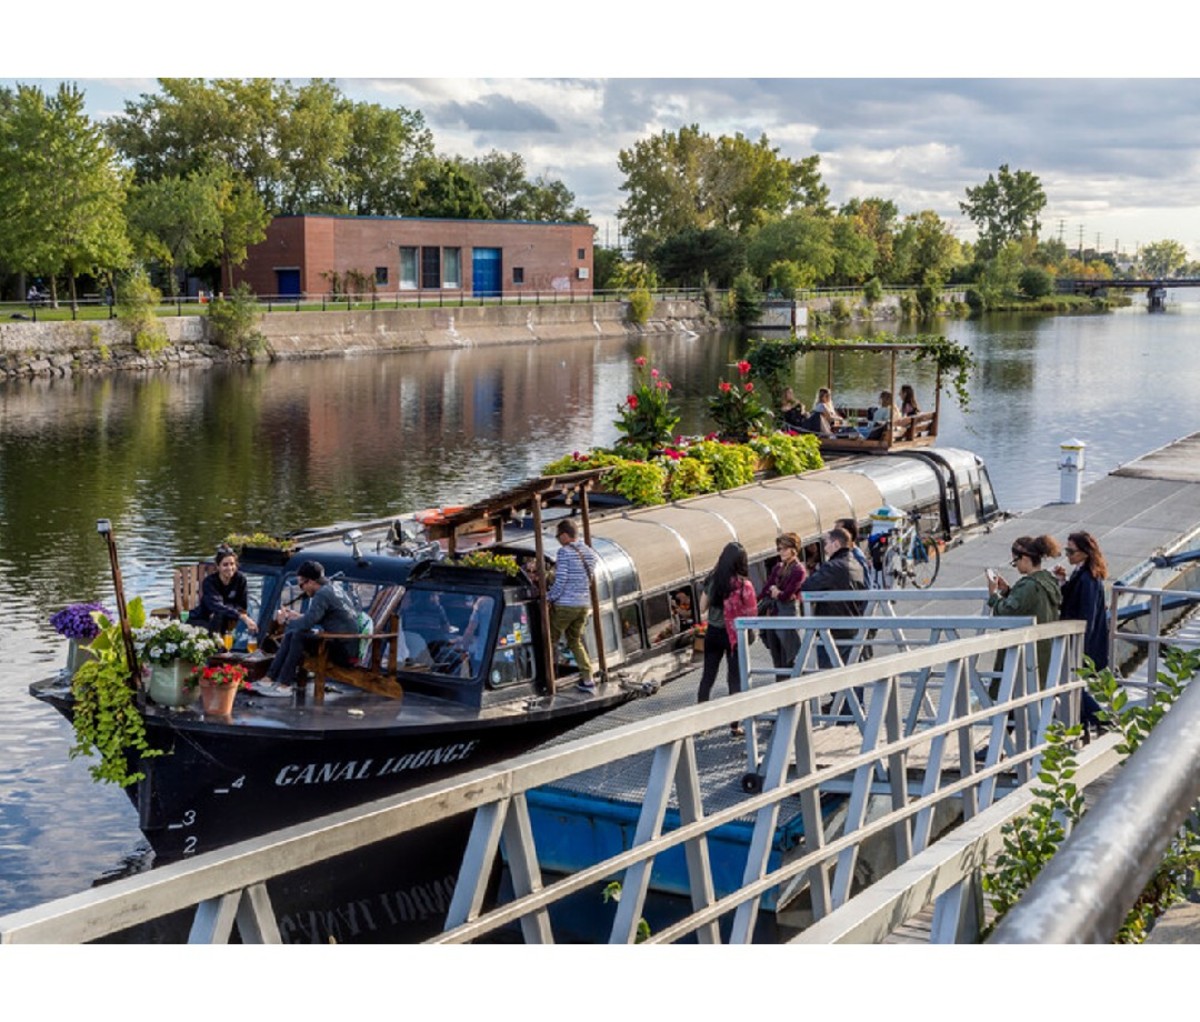 Boat with passengers on Lachine Canal